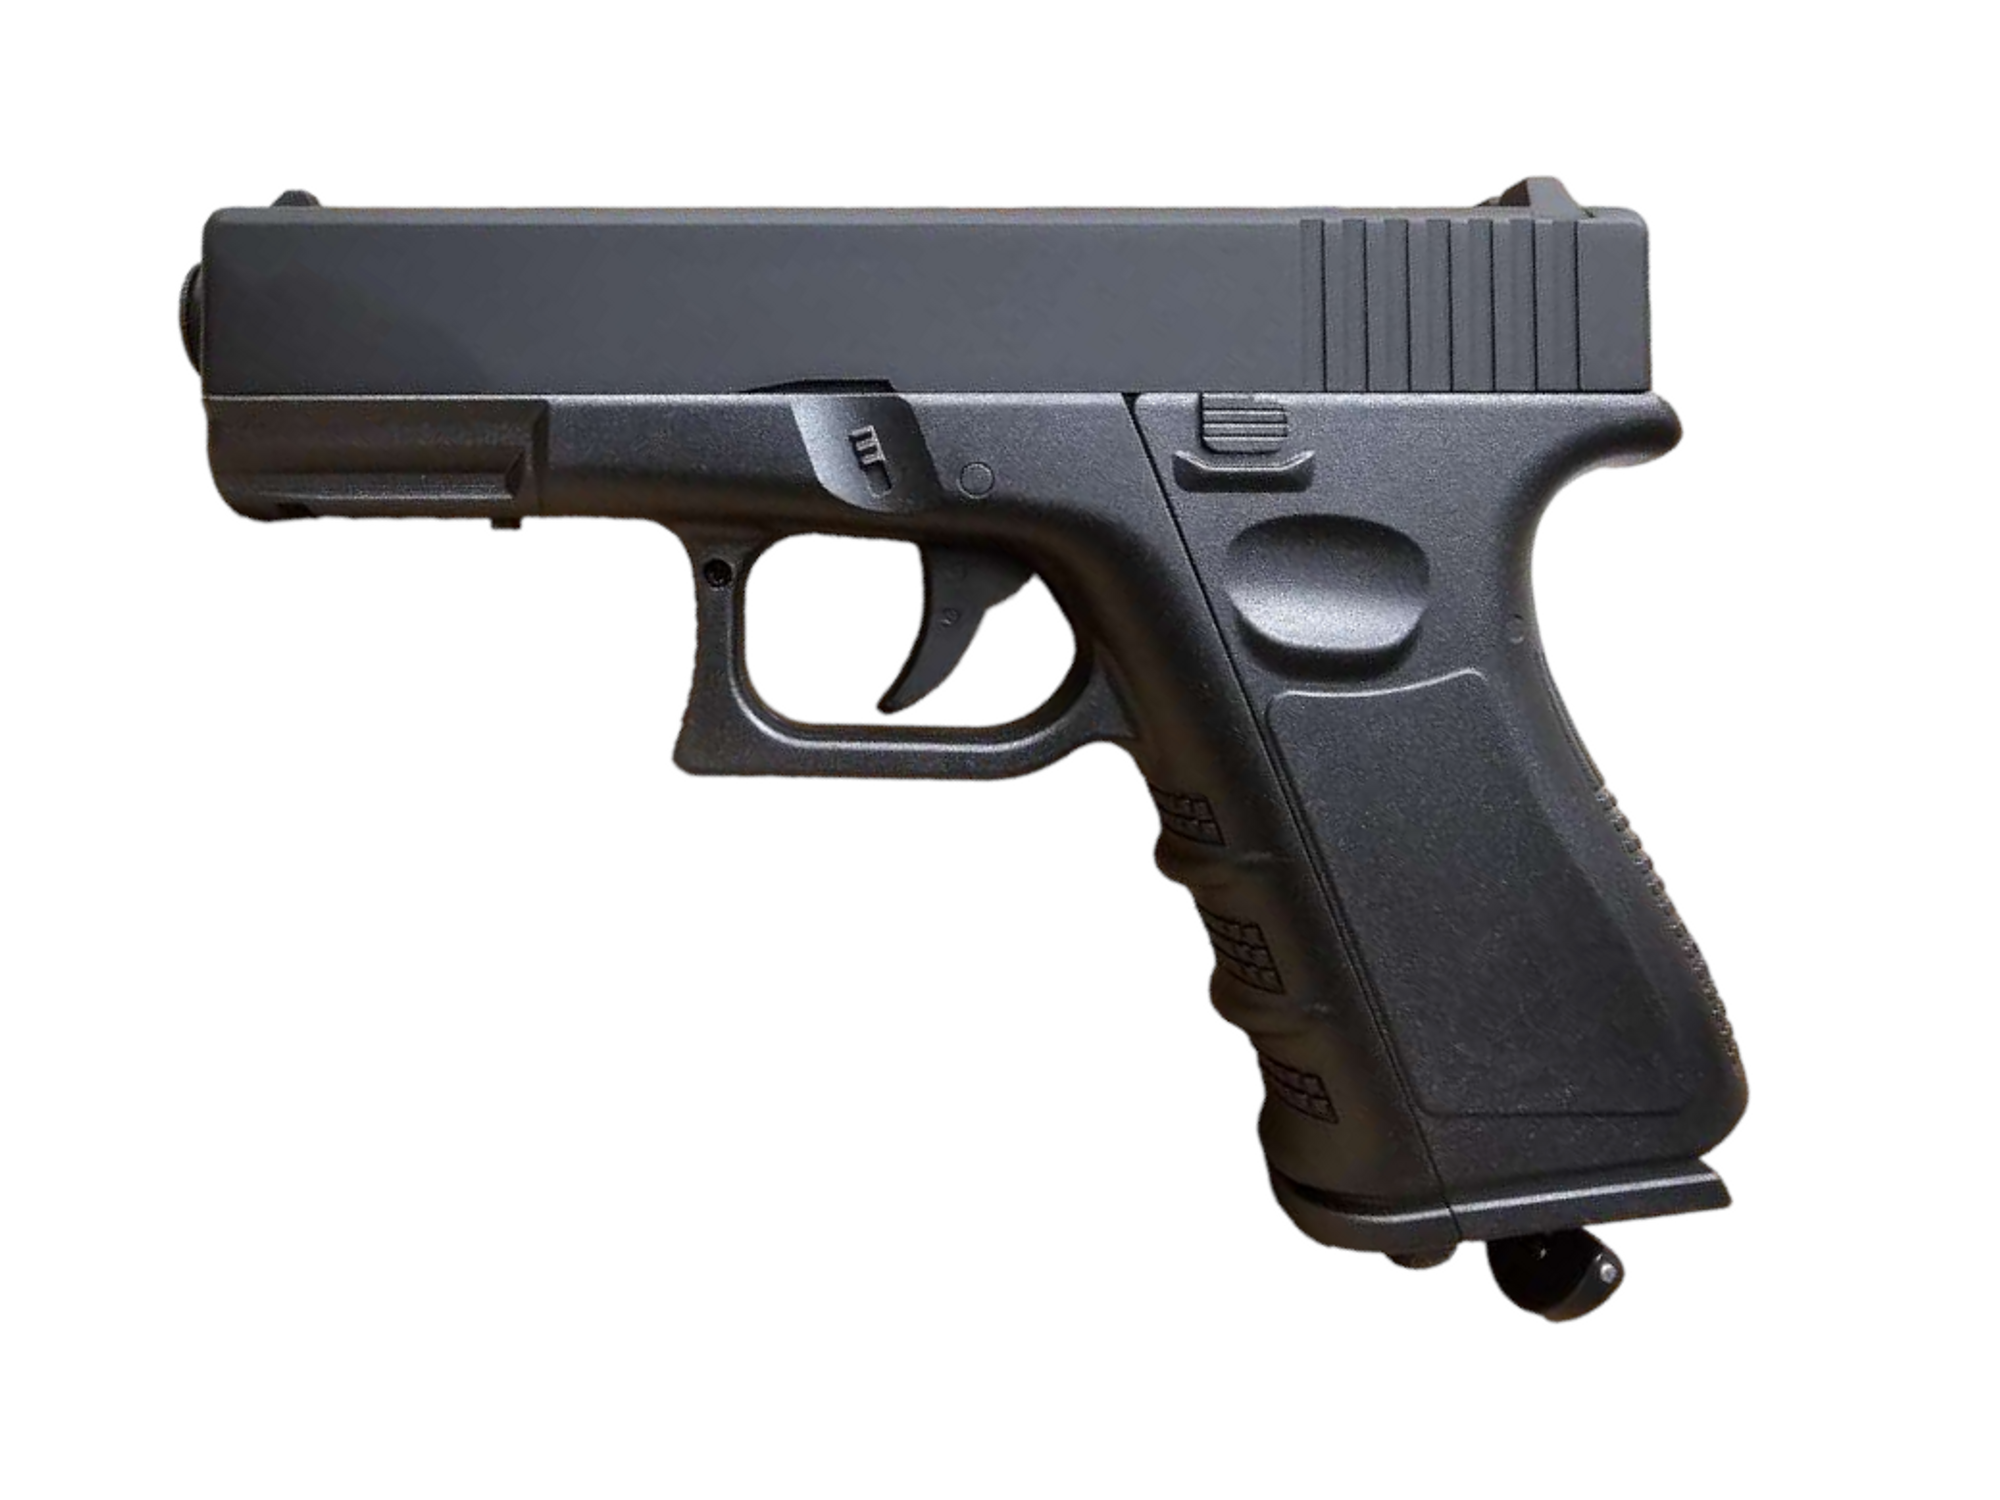 FS Glock 23 CO2 Powered Non-Blowback Airsoft Pistol